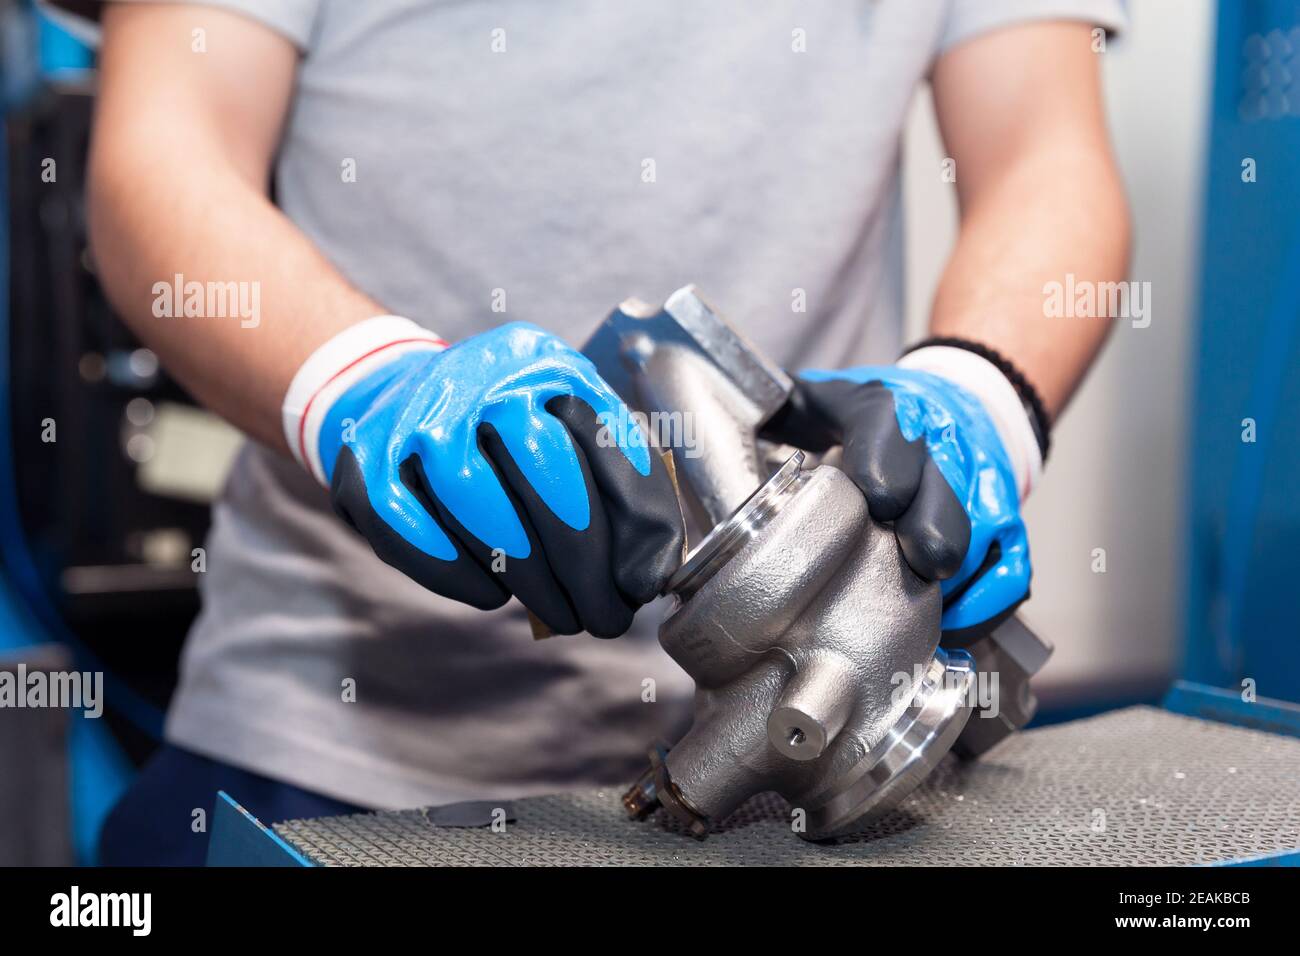 Manual work in the automotive industry Stock Photo